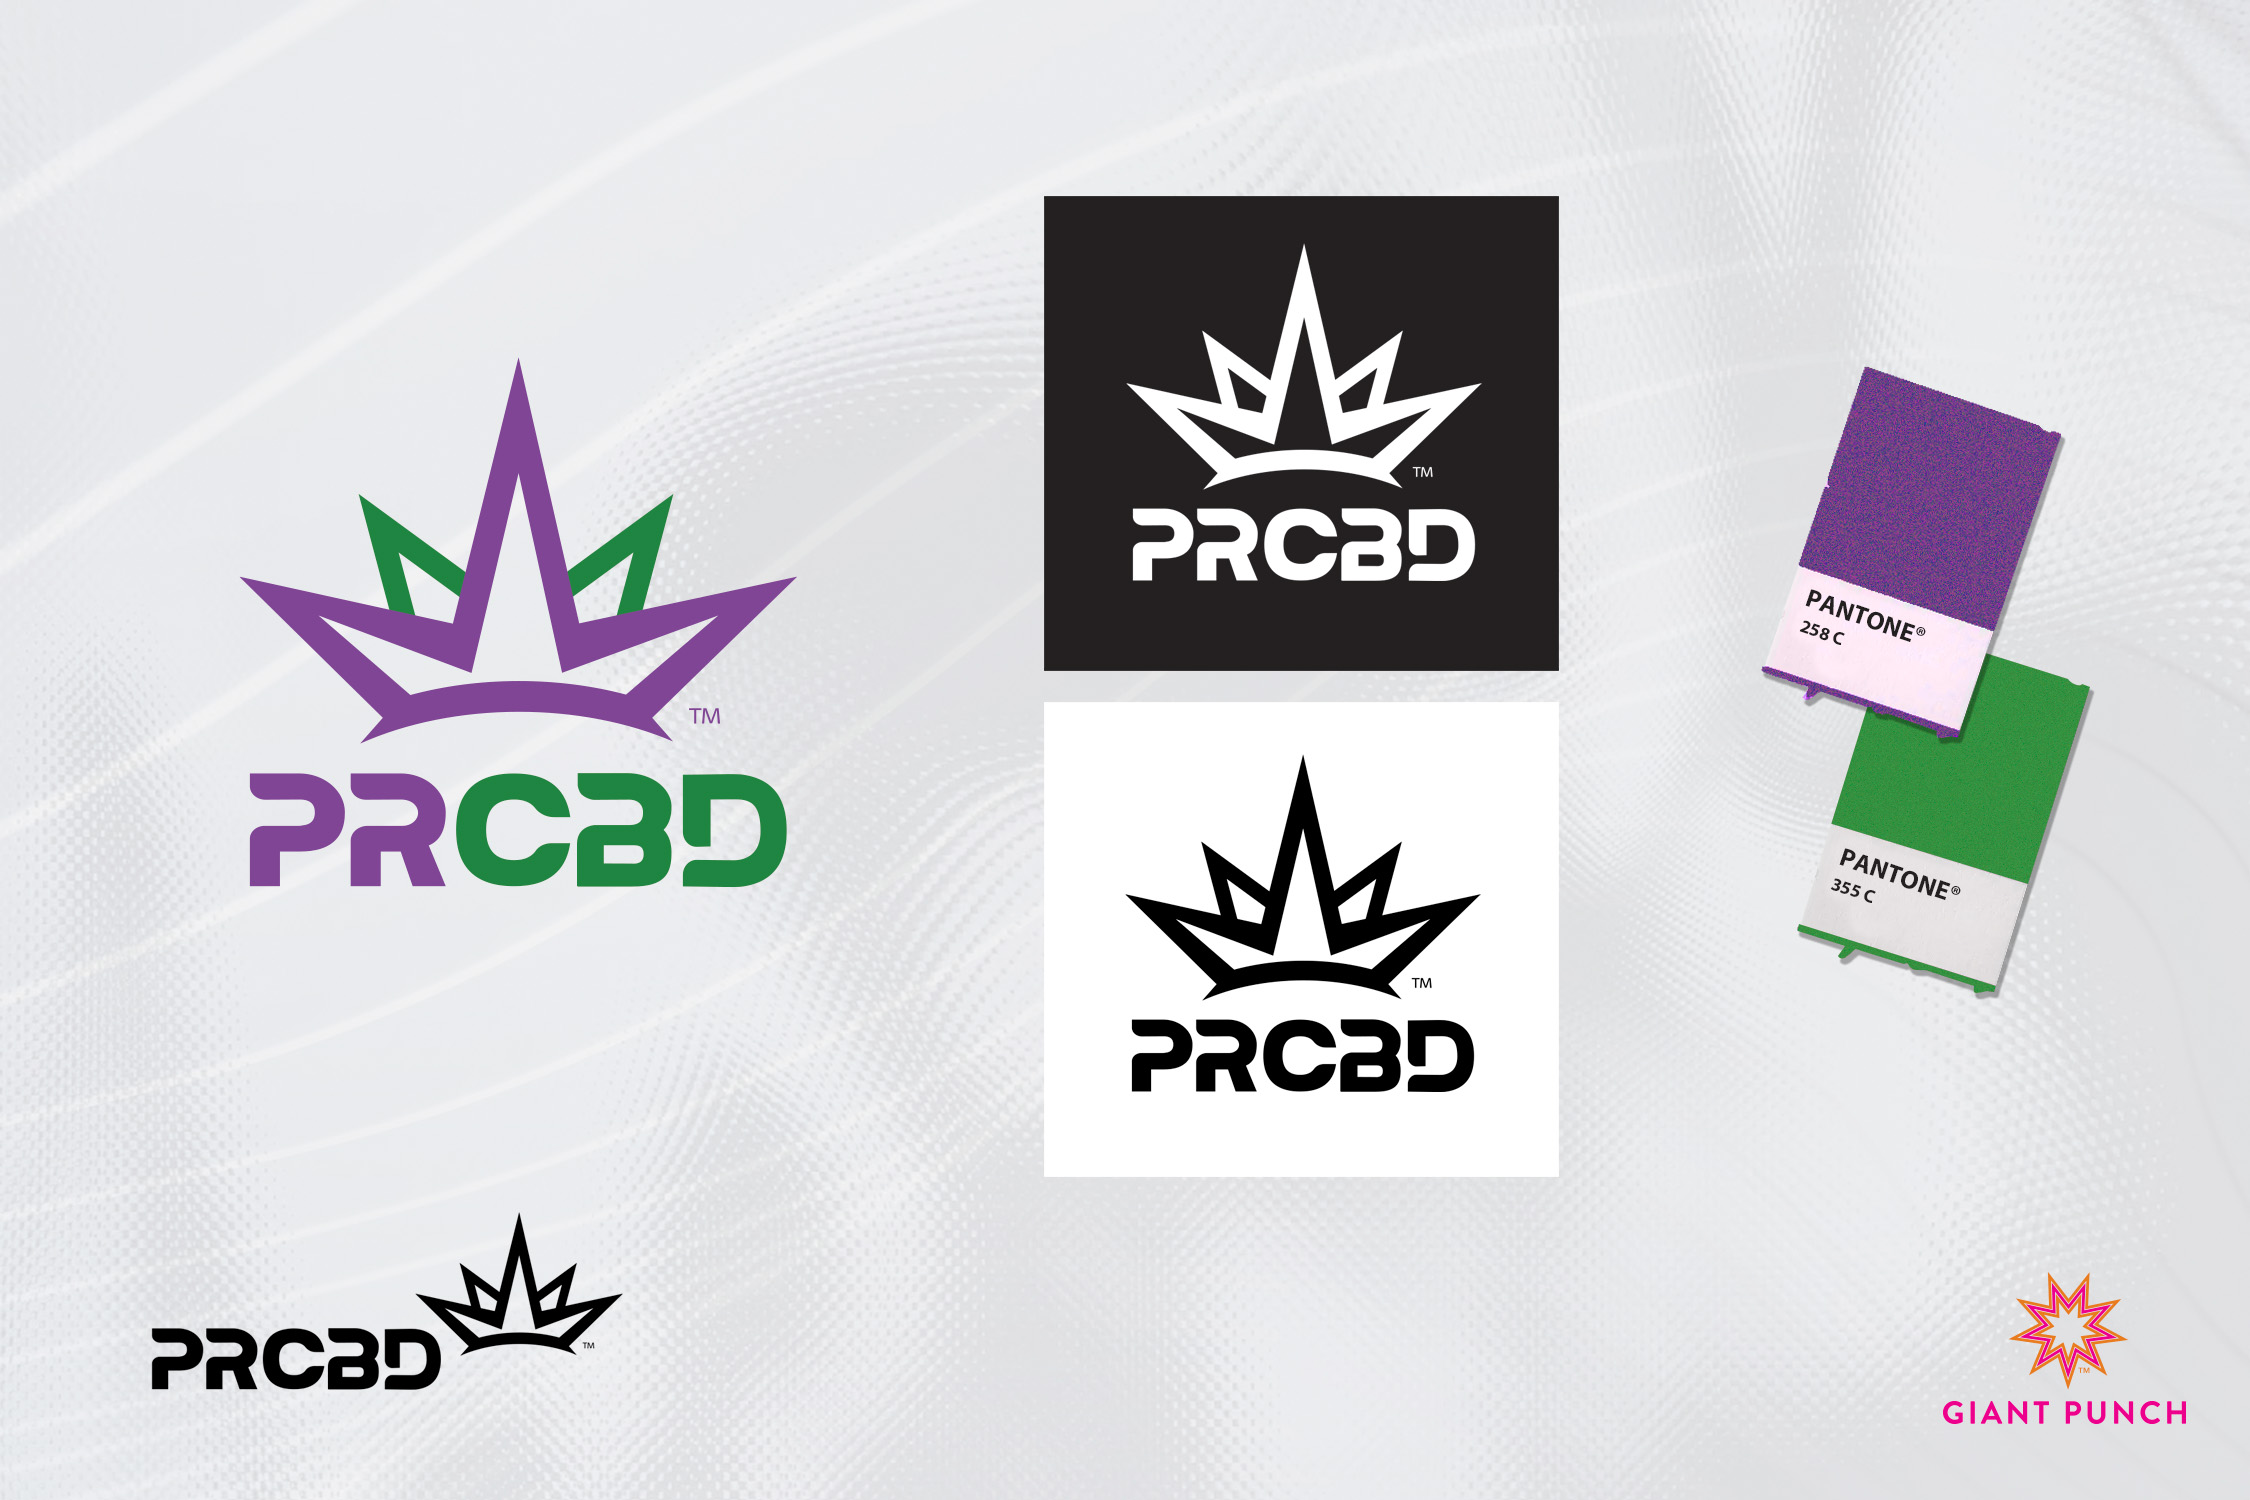 A bold and royal logo for PRCBD, a premier CBD shop for people and pets, designed by Giant Punch.